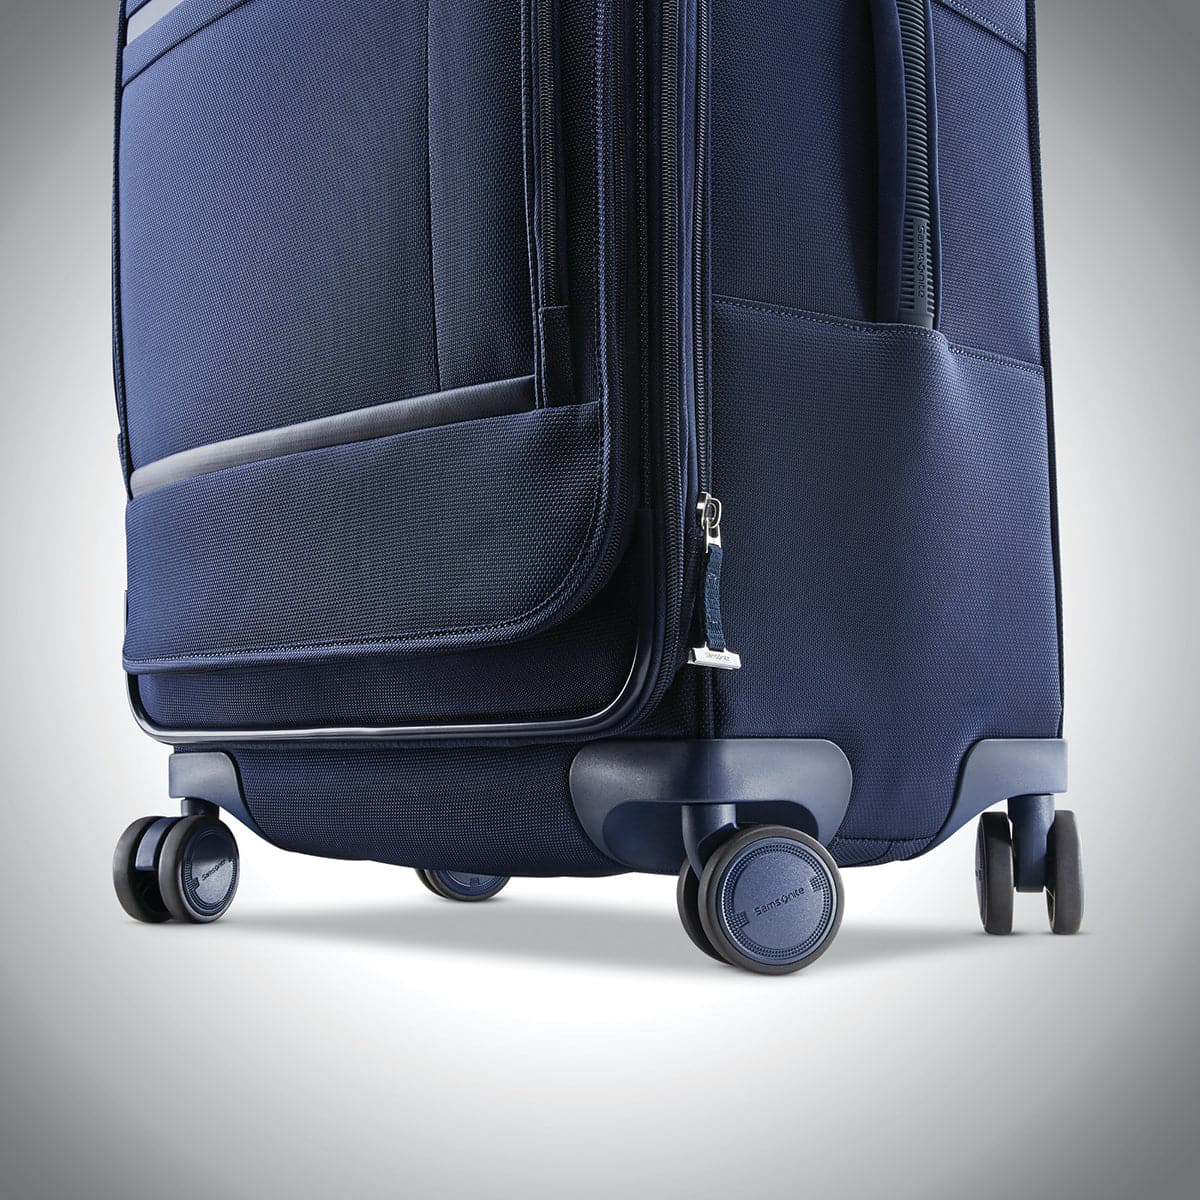 Samsonite Insignis Softside Expandable 29" Spinner Carry-On Luggage